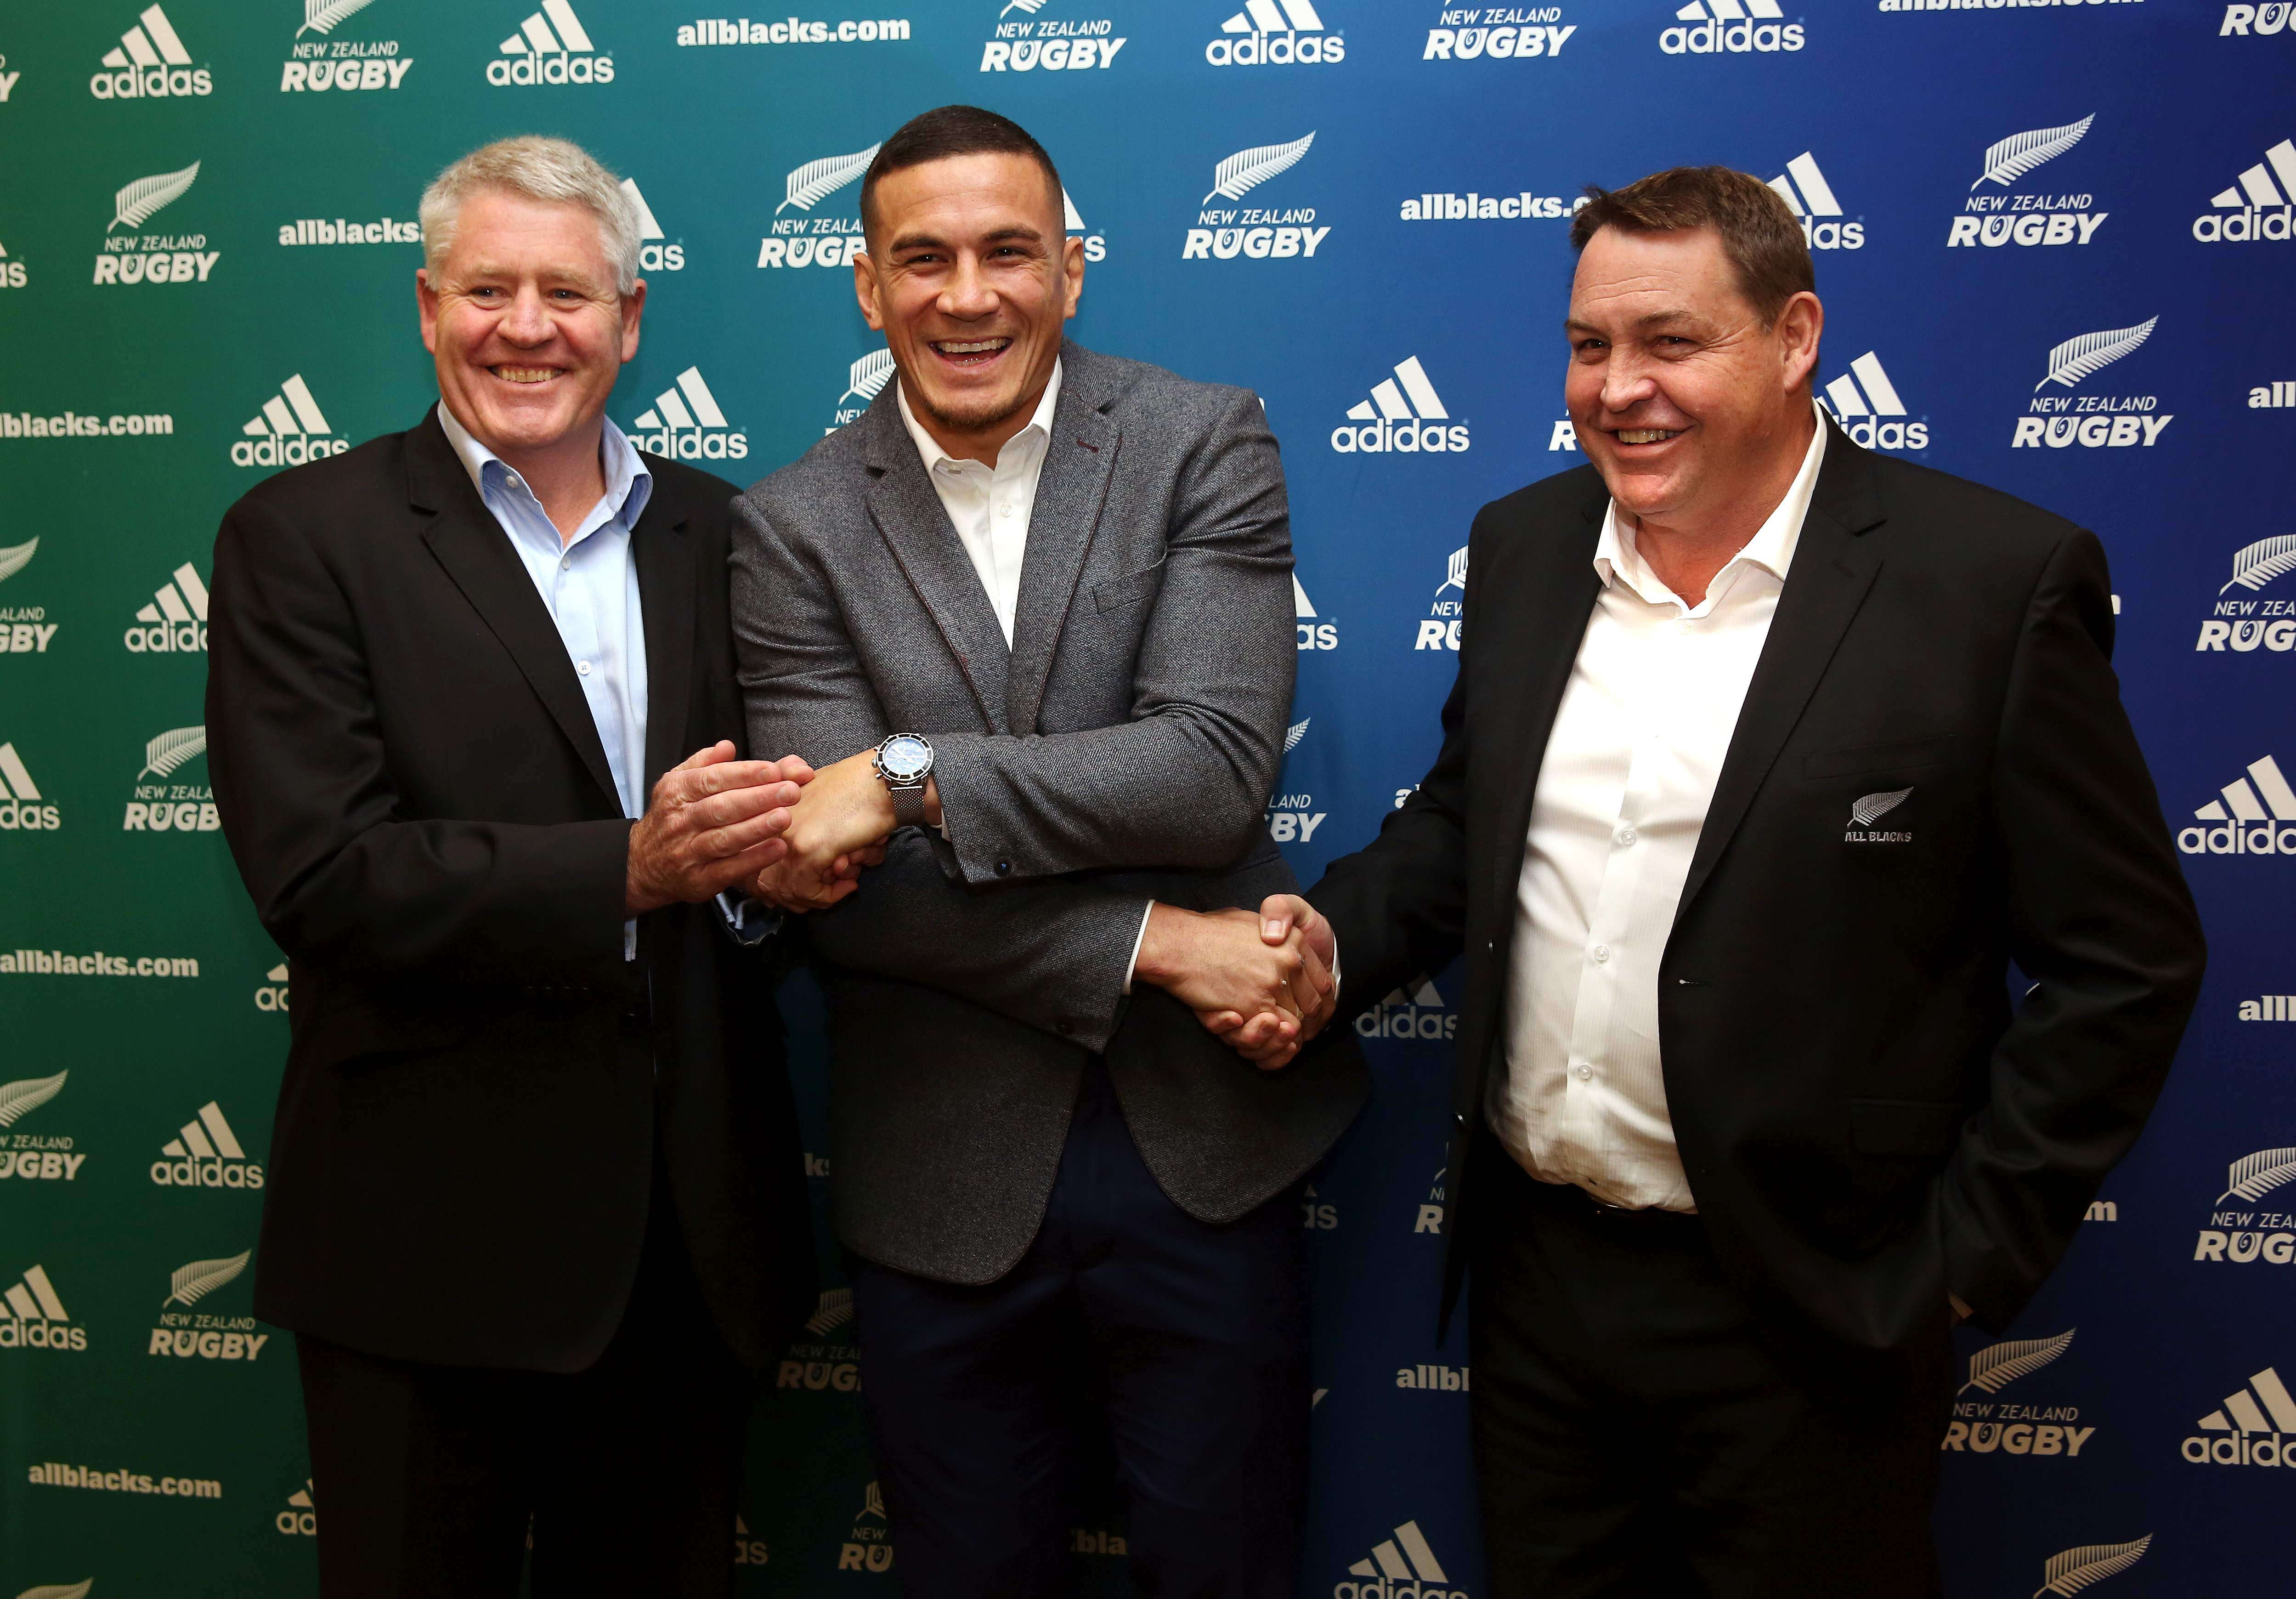 All Black Sonny Bill Williams with New Zealand Rugby Union chief executive Steve Tew (left) and All Blacks coach Steve Hansen after it was announced Sonny Bill had signed a three-year deal with the union. Photo: AFP